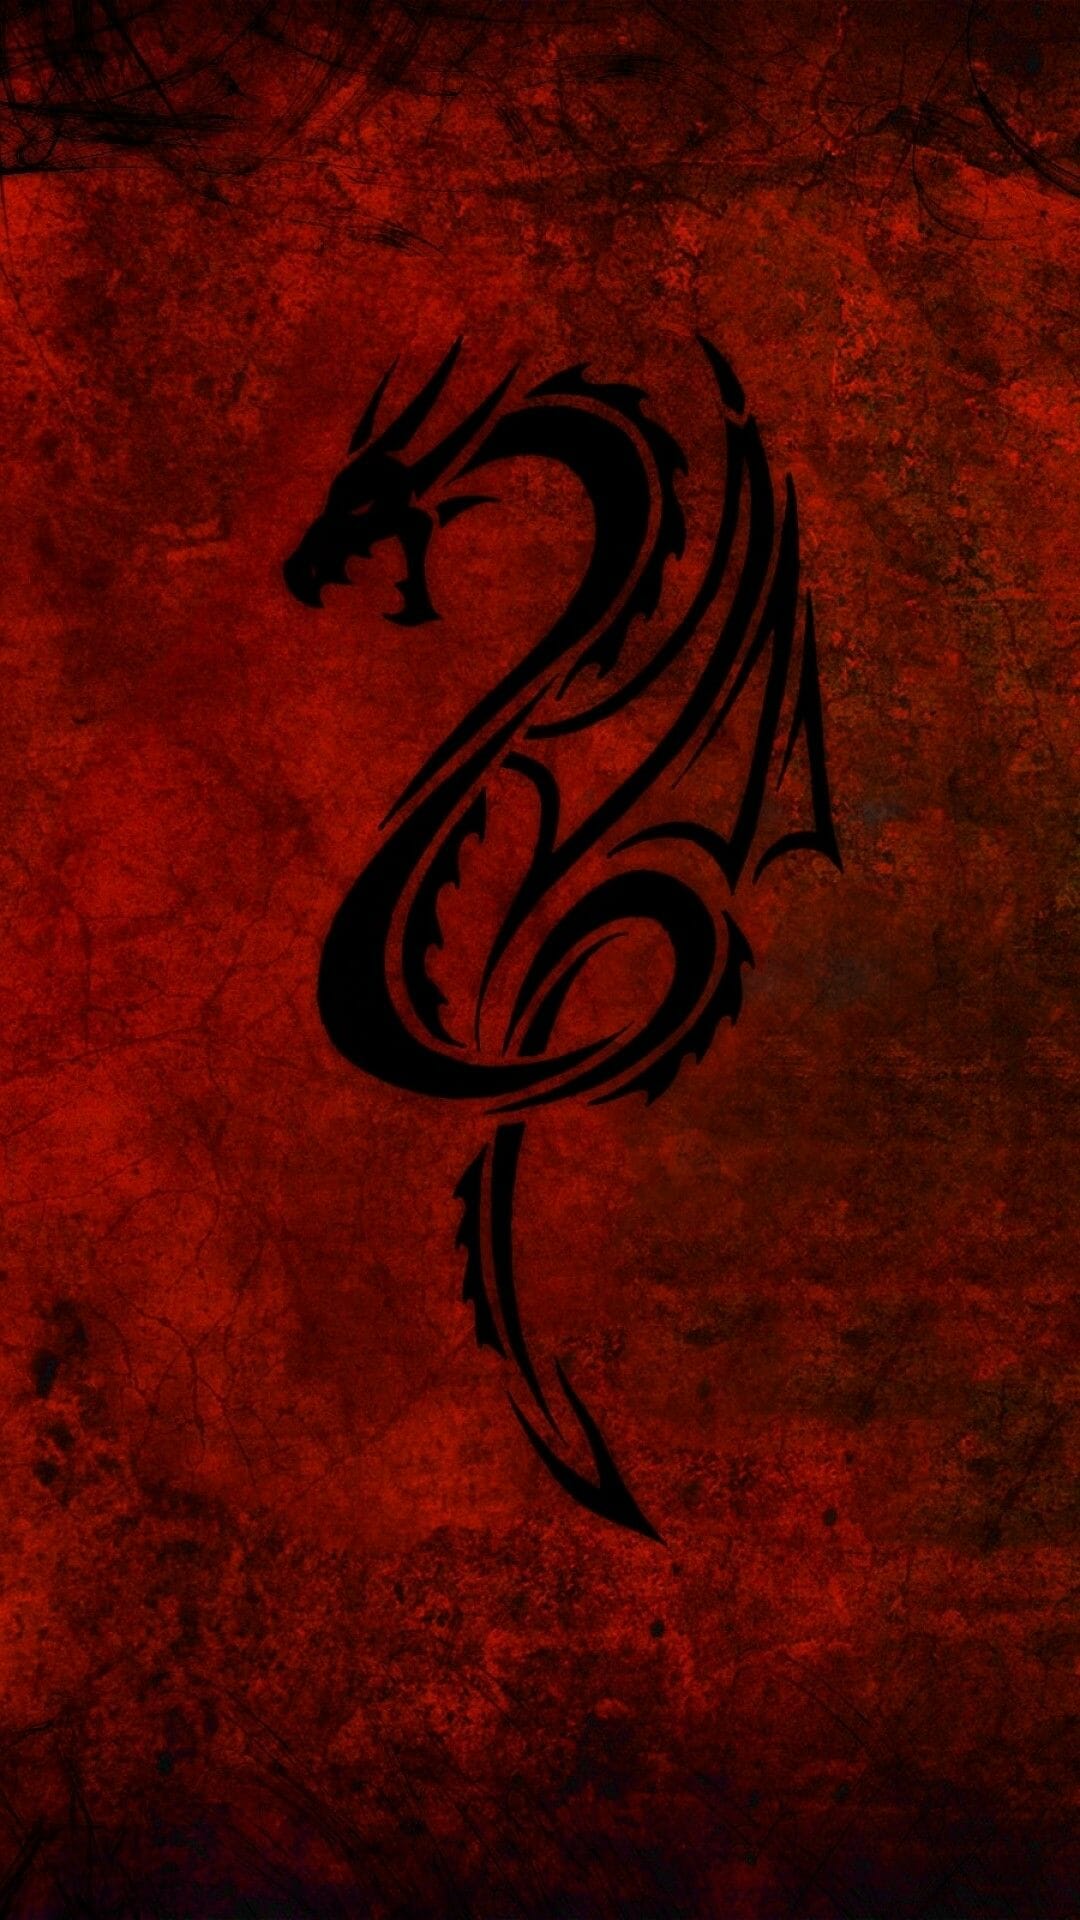 Red Dragon Hd Wallpapers